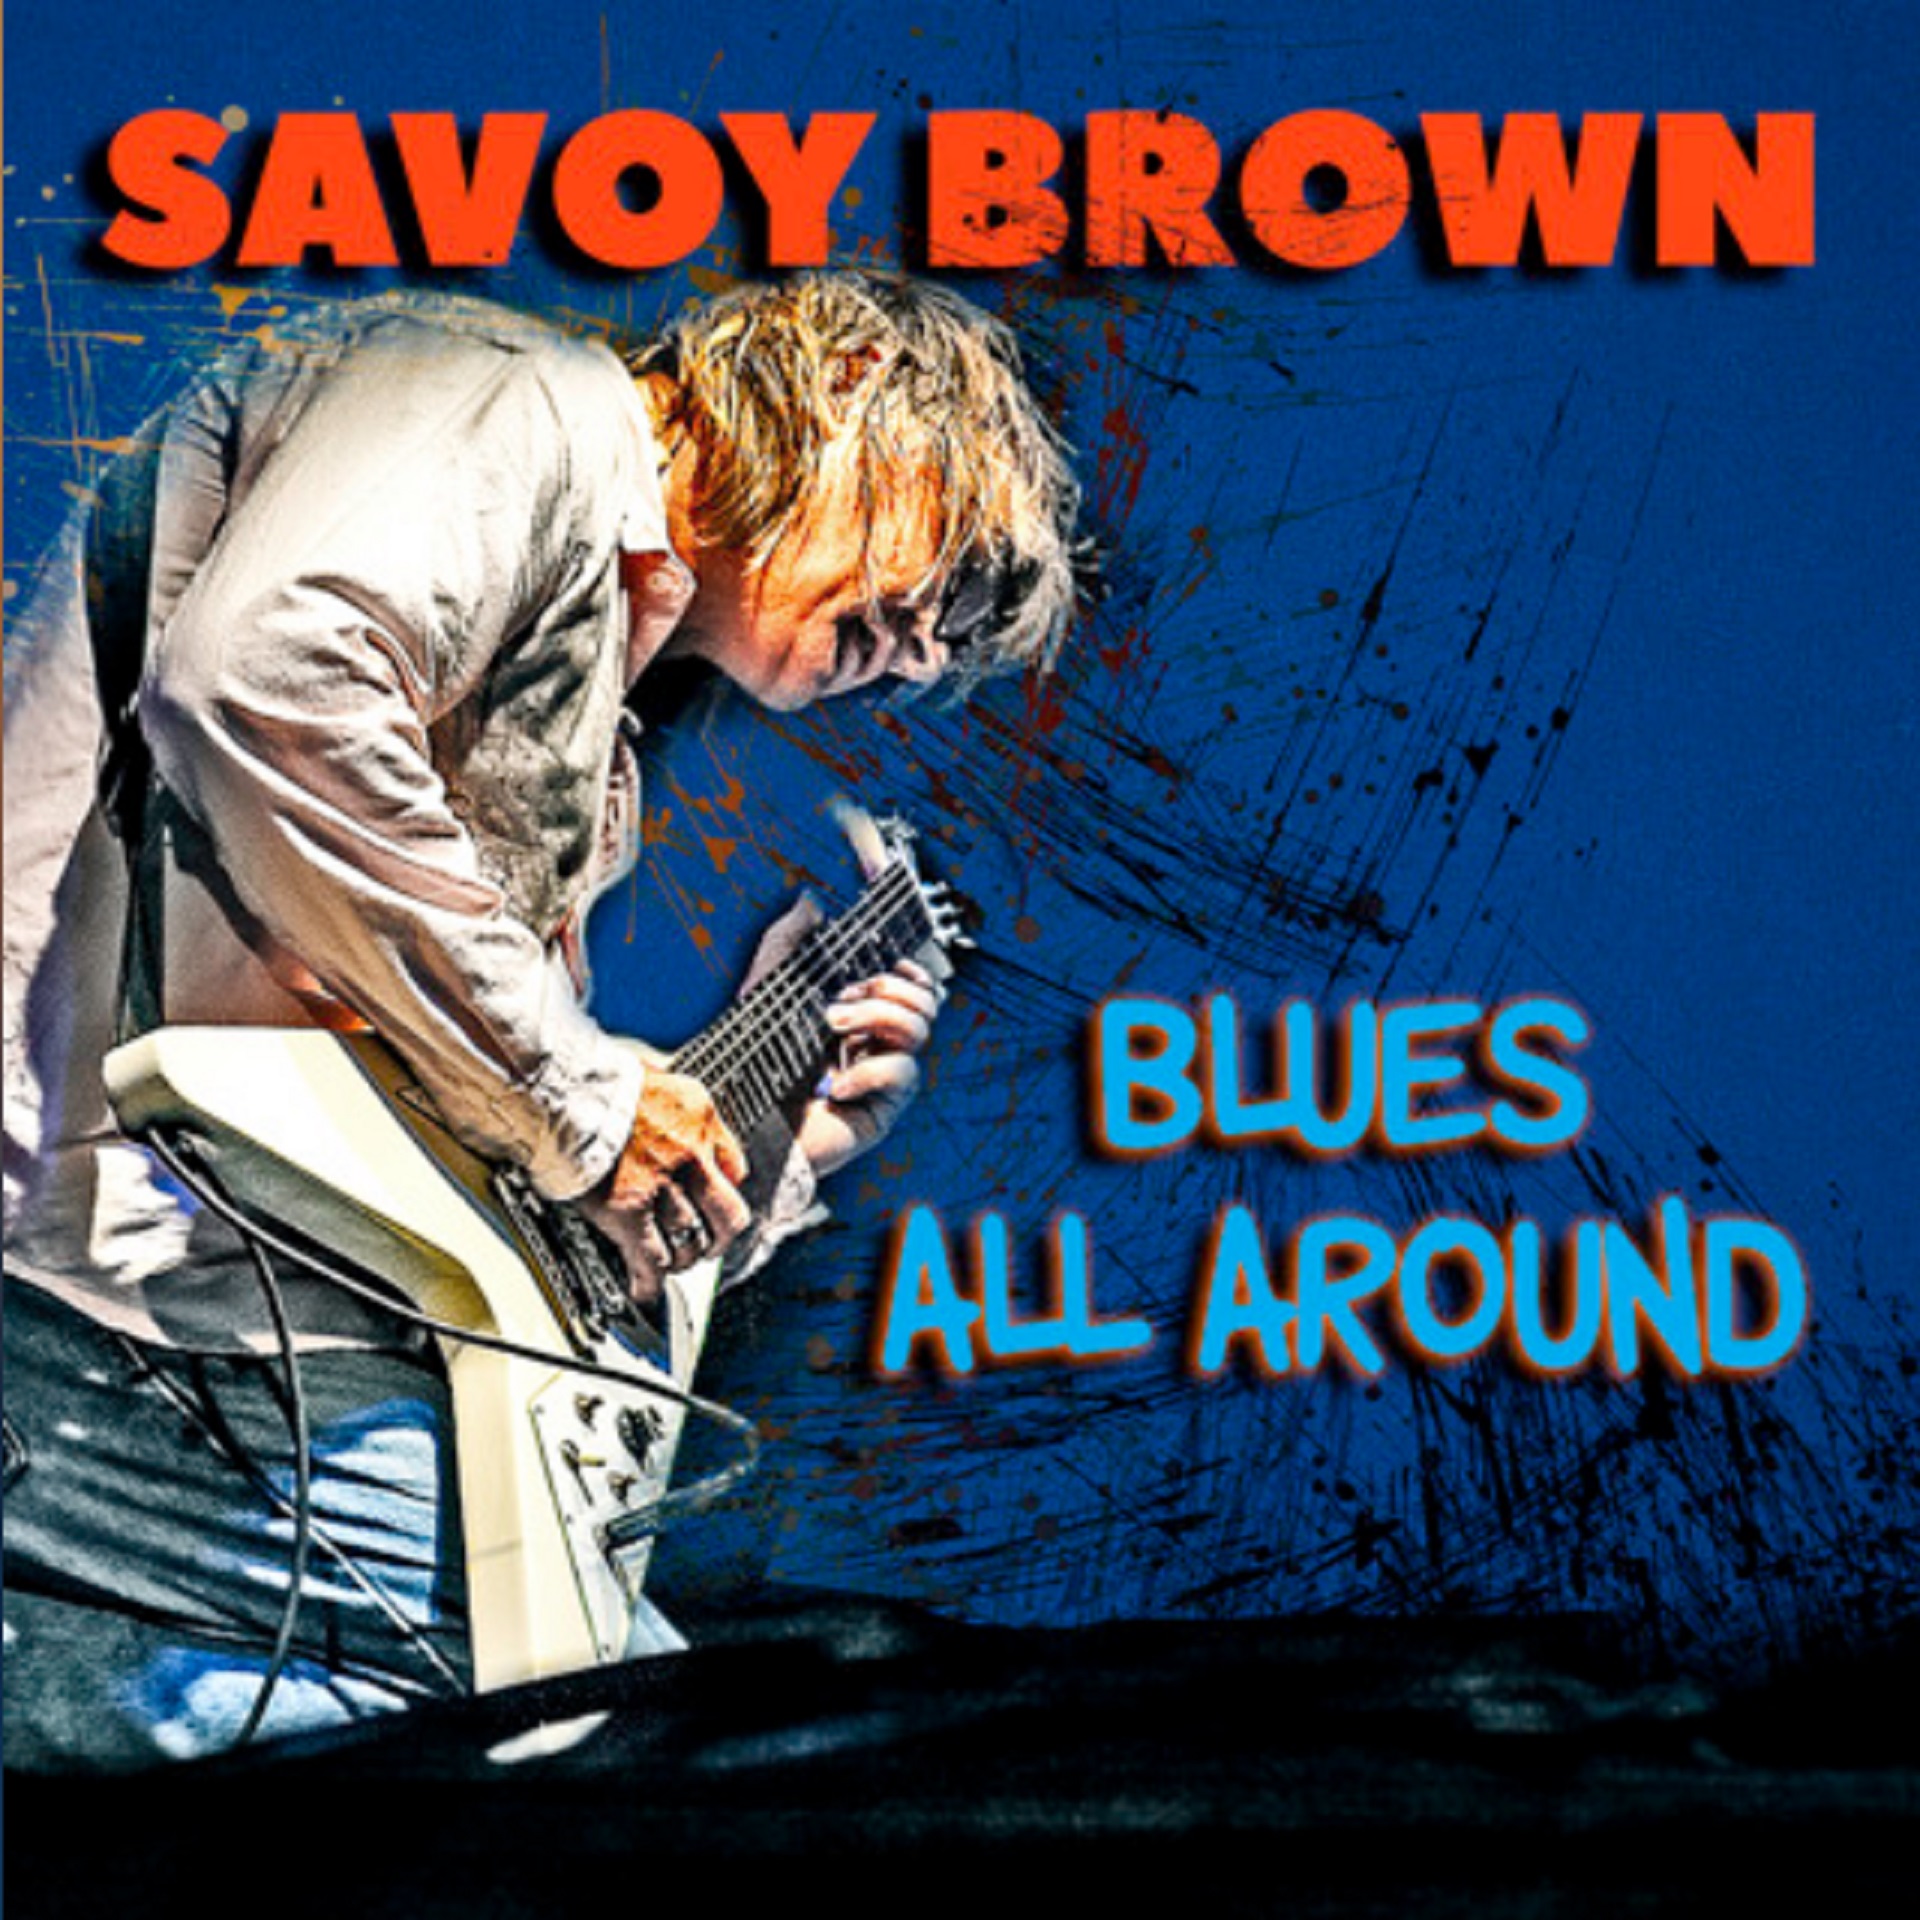 Legendary British Blues-Rock Band Savoy Brown Releases New Album, Blues All Around, on February 17th via Quarto Valley Records after the Passing of Acclaimed Founder, Kim Simmonds